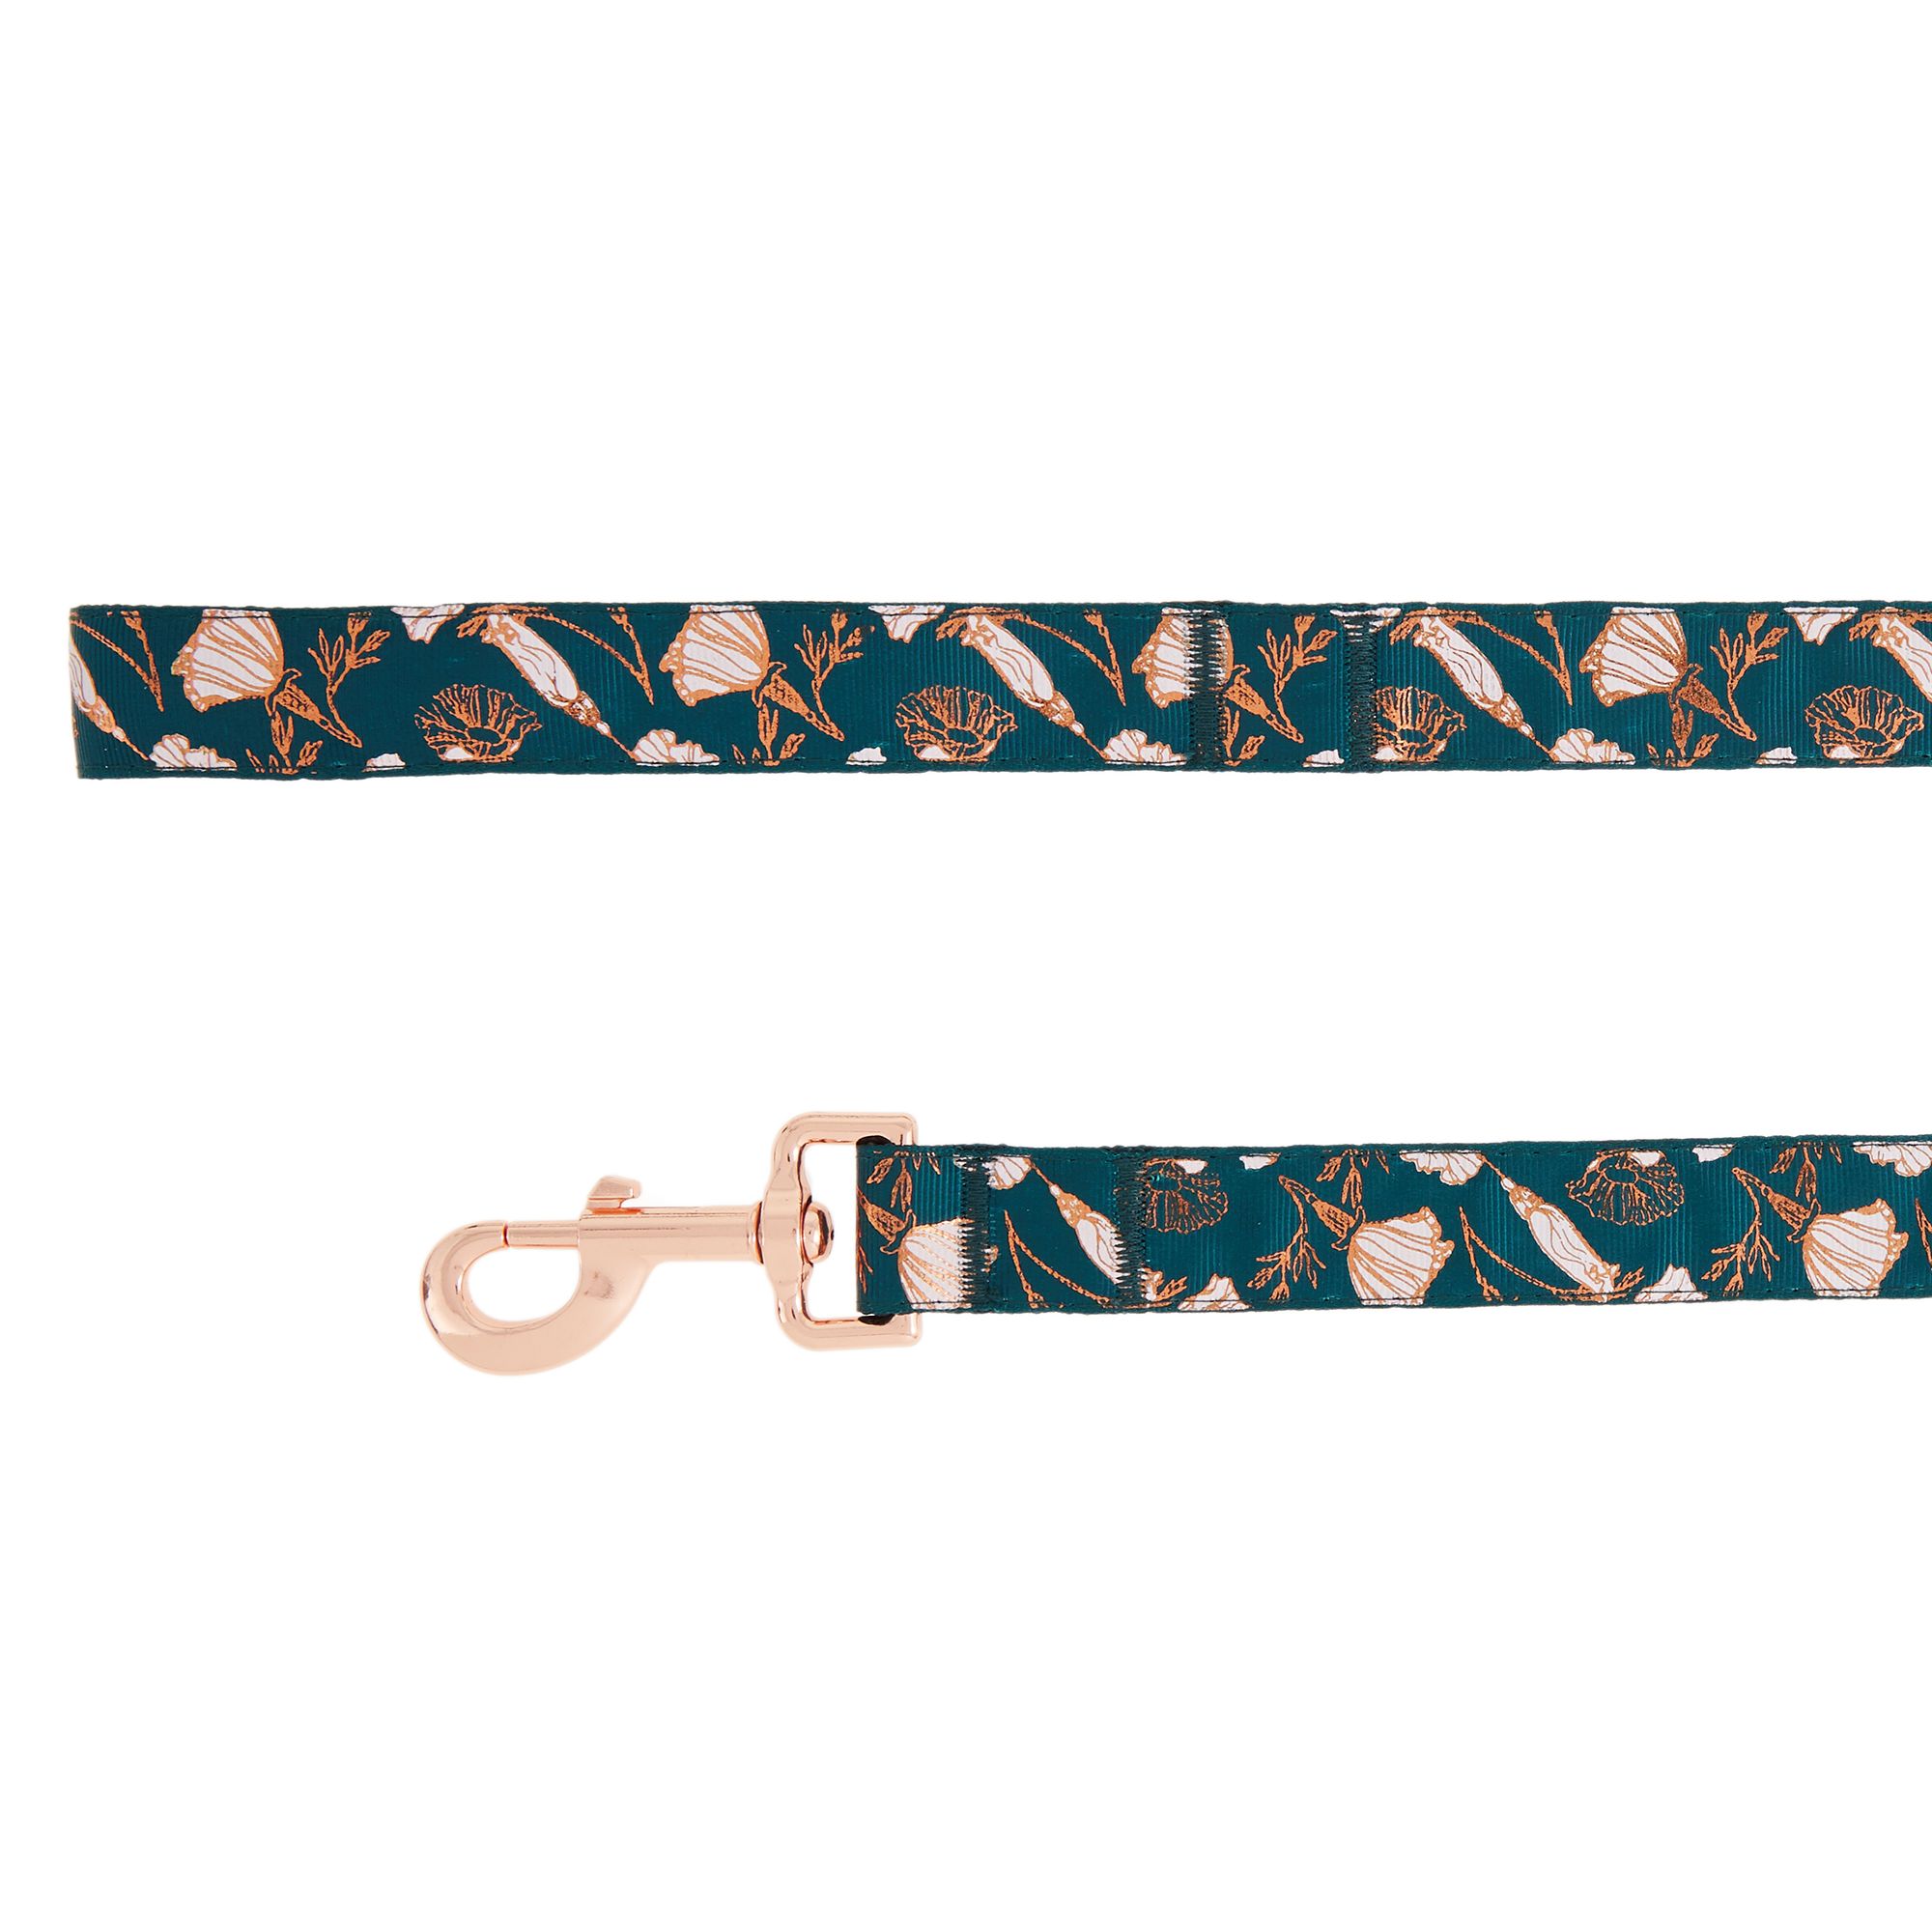 Top Paw&reg; Teal Floral Dog Leash: 6-ft long, 1-in wide